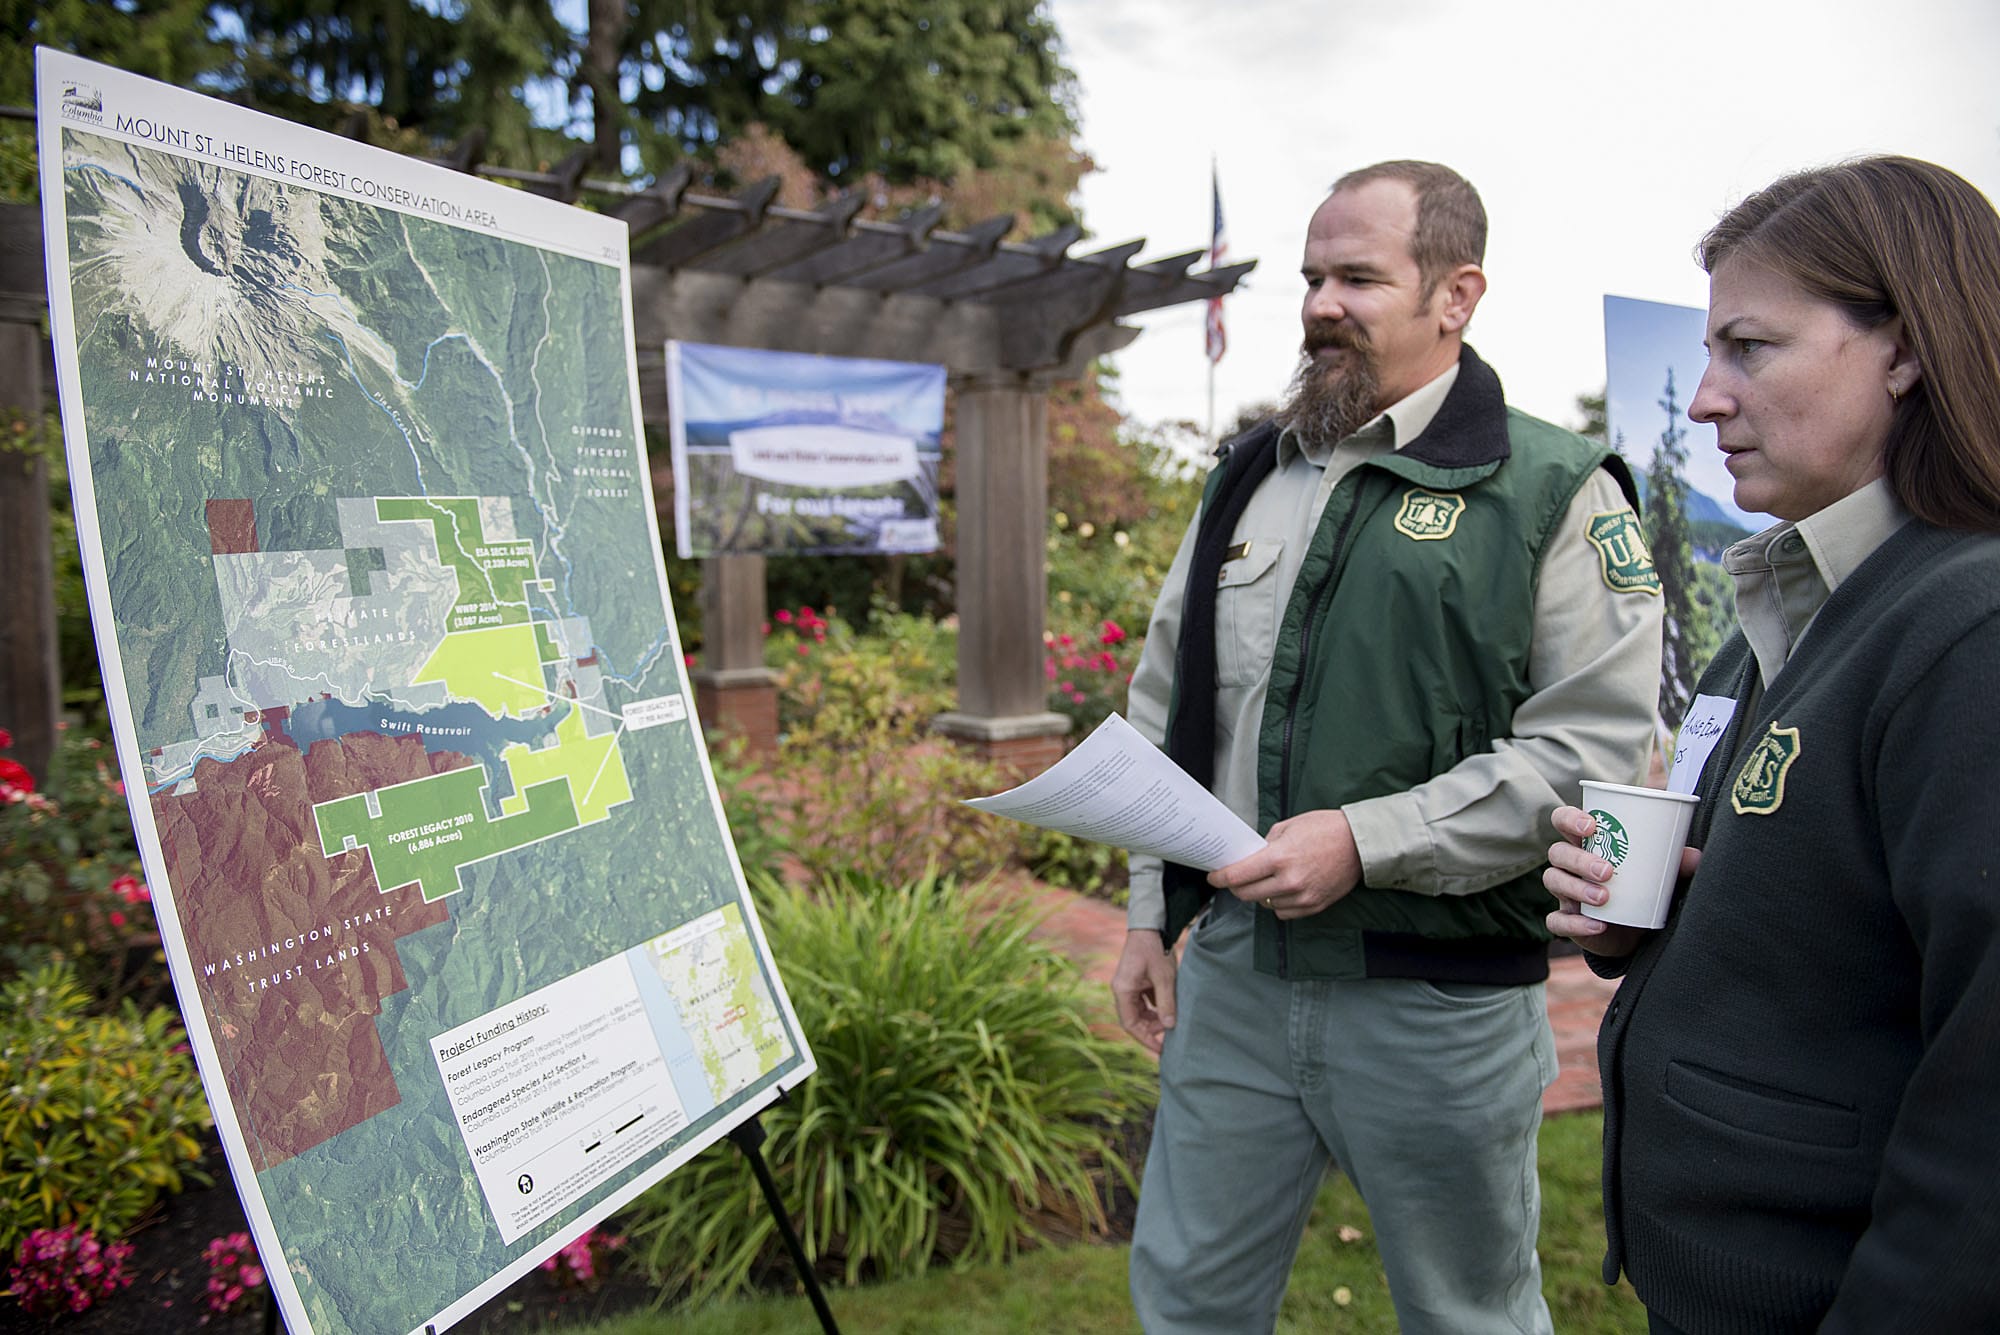 Tedd Huffman, monument manager at the Mount St. Helens National Volcanic Monument, left, and Angie Elam of the Gifford Pinchot National Forest, look over a diagram of the Mount St. Helens Forest Conservation Area on Tuesday morning, Sept. 22, 2015 at the Lynch Residence in Vancouver.